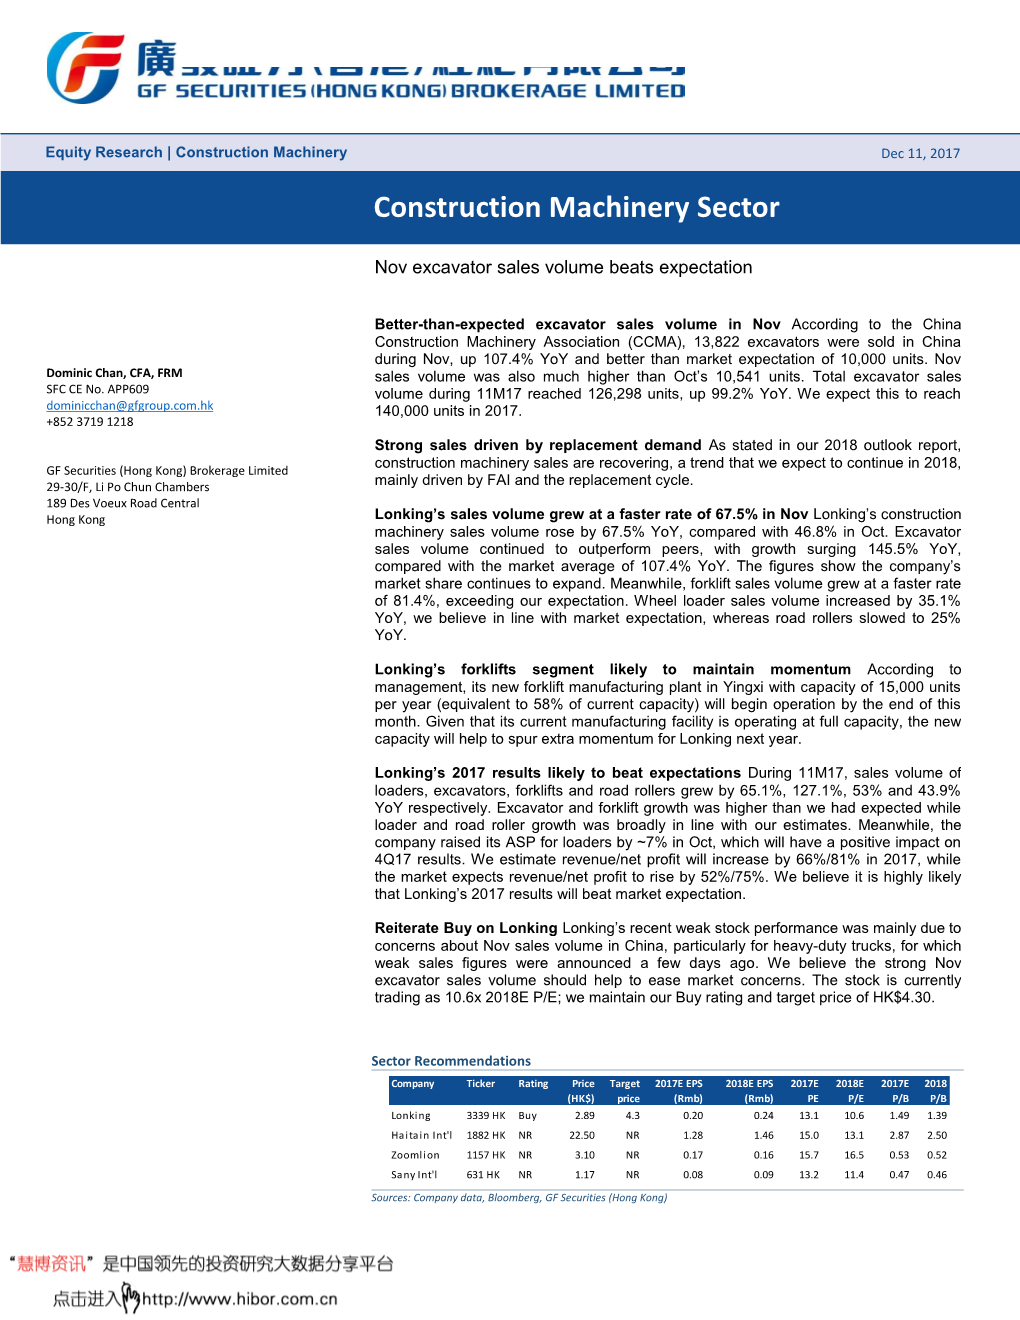 Construction Machinery Sector